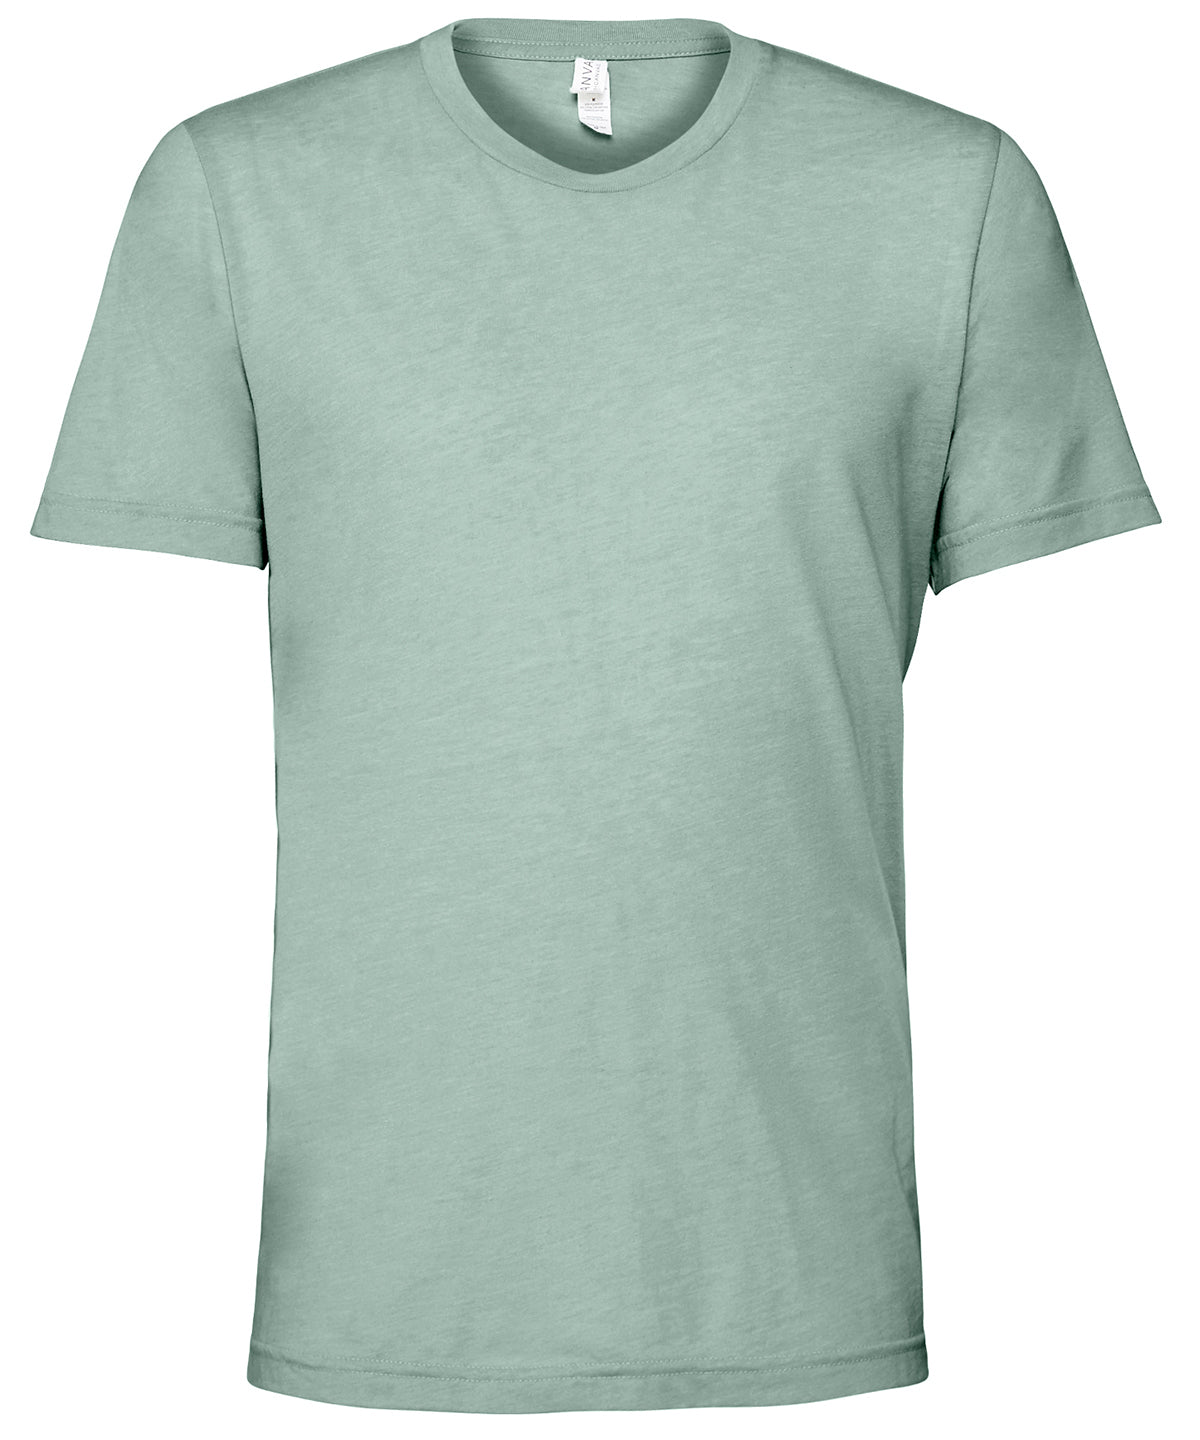 Personalised T-Shirts - Turquoise Bella Canvas Unisex triblend crew neck t-shirt